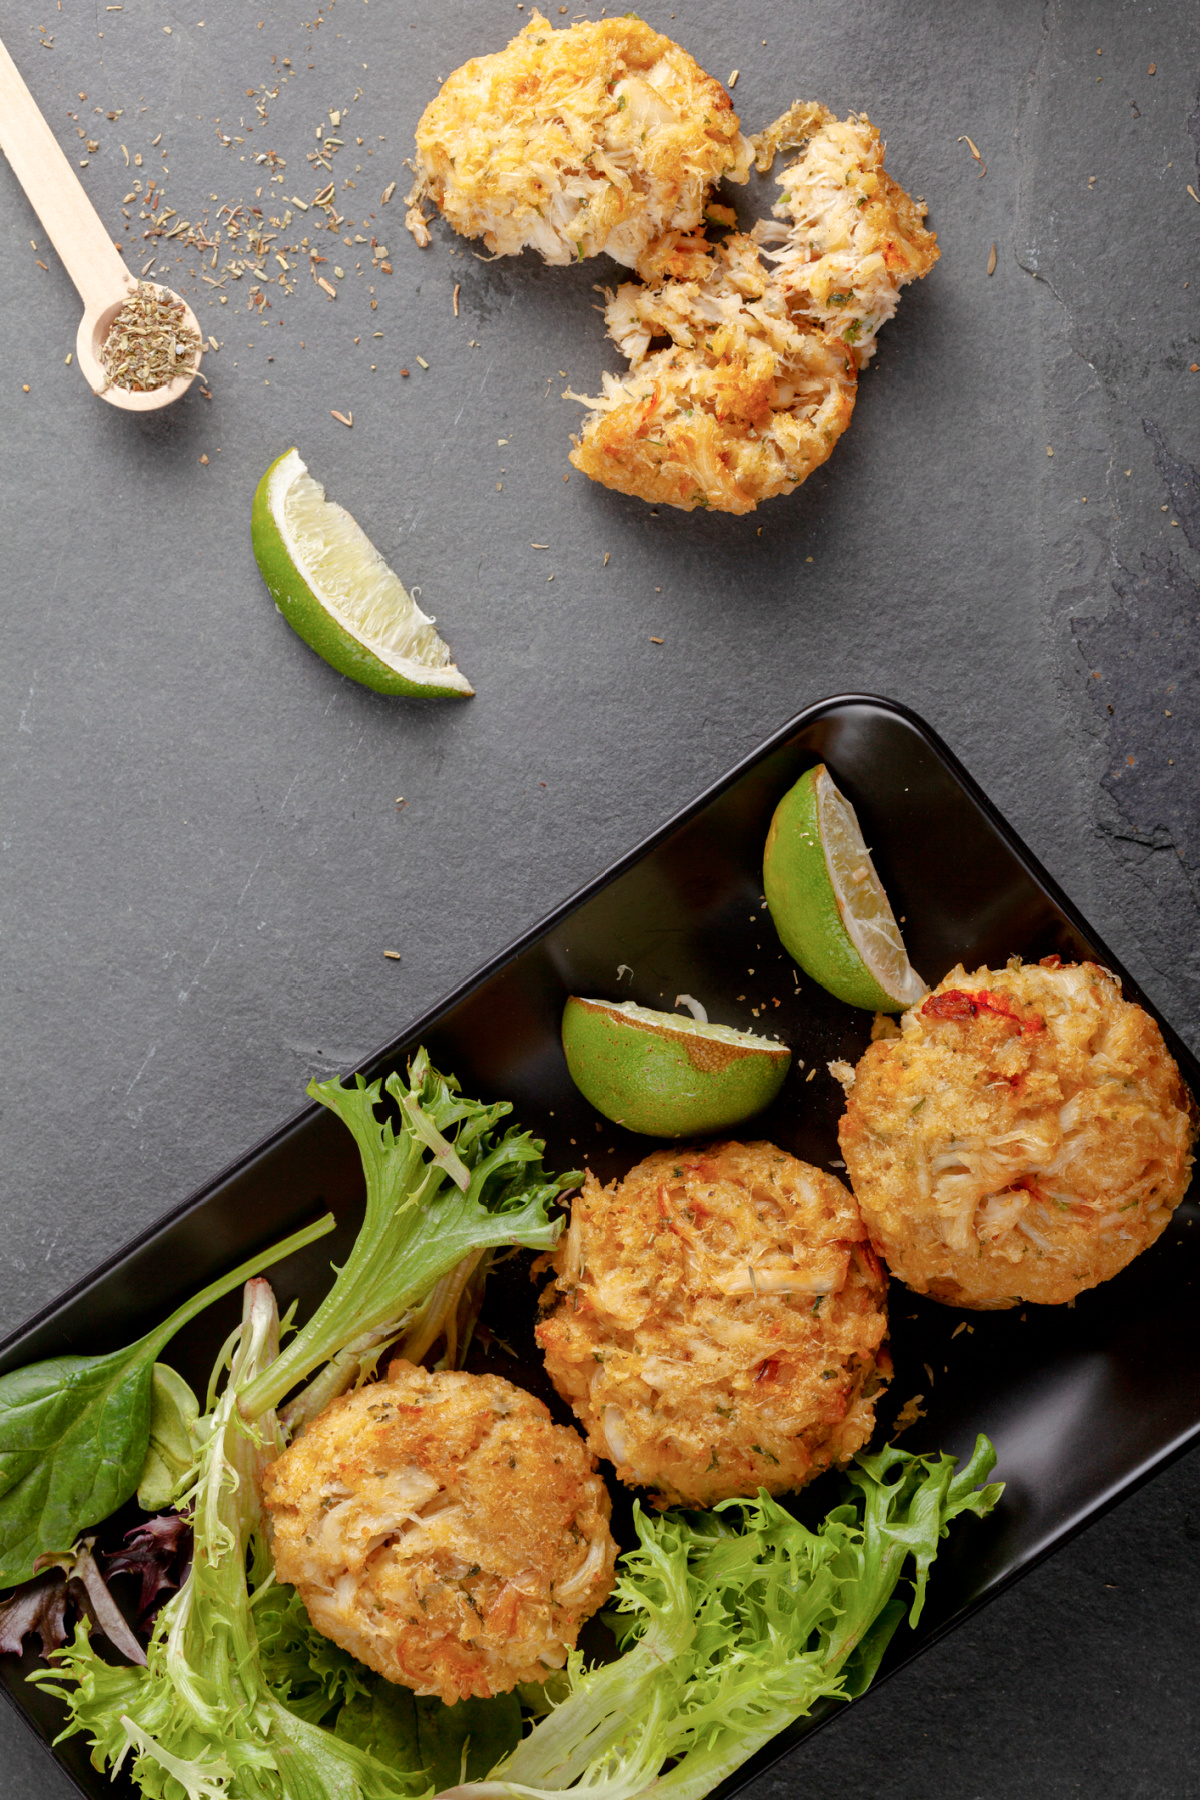 Homemade Maryland lump crab cakes made with very little binders